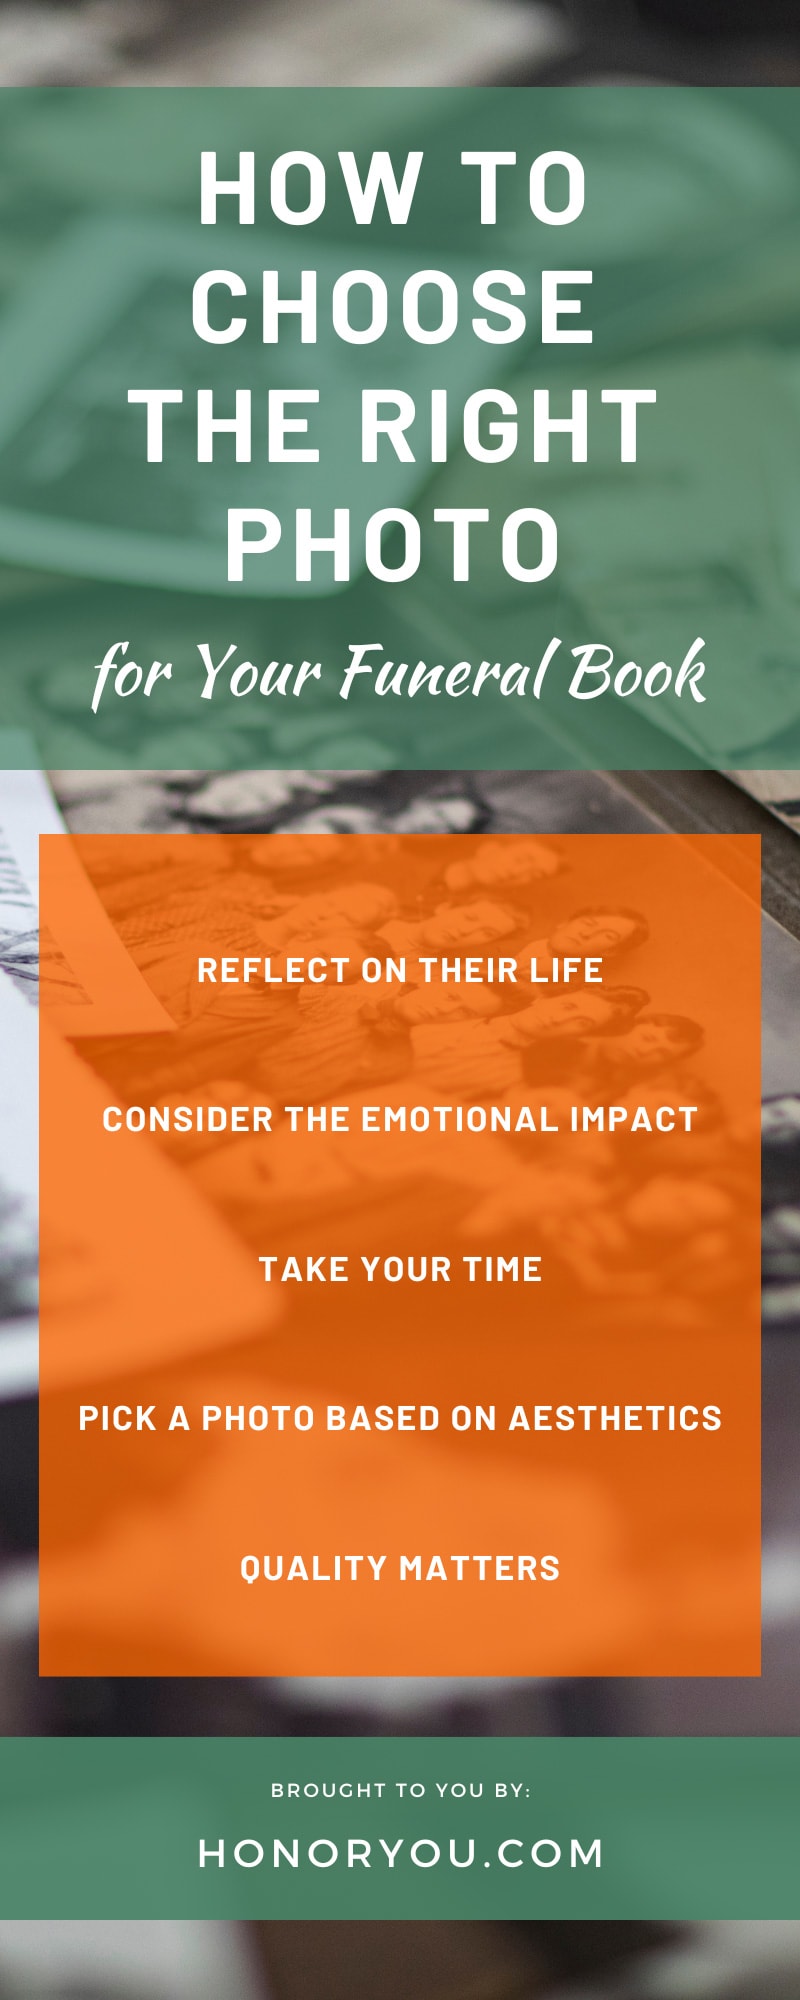 How To Choose the Right Photo for Your Funeral Book